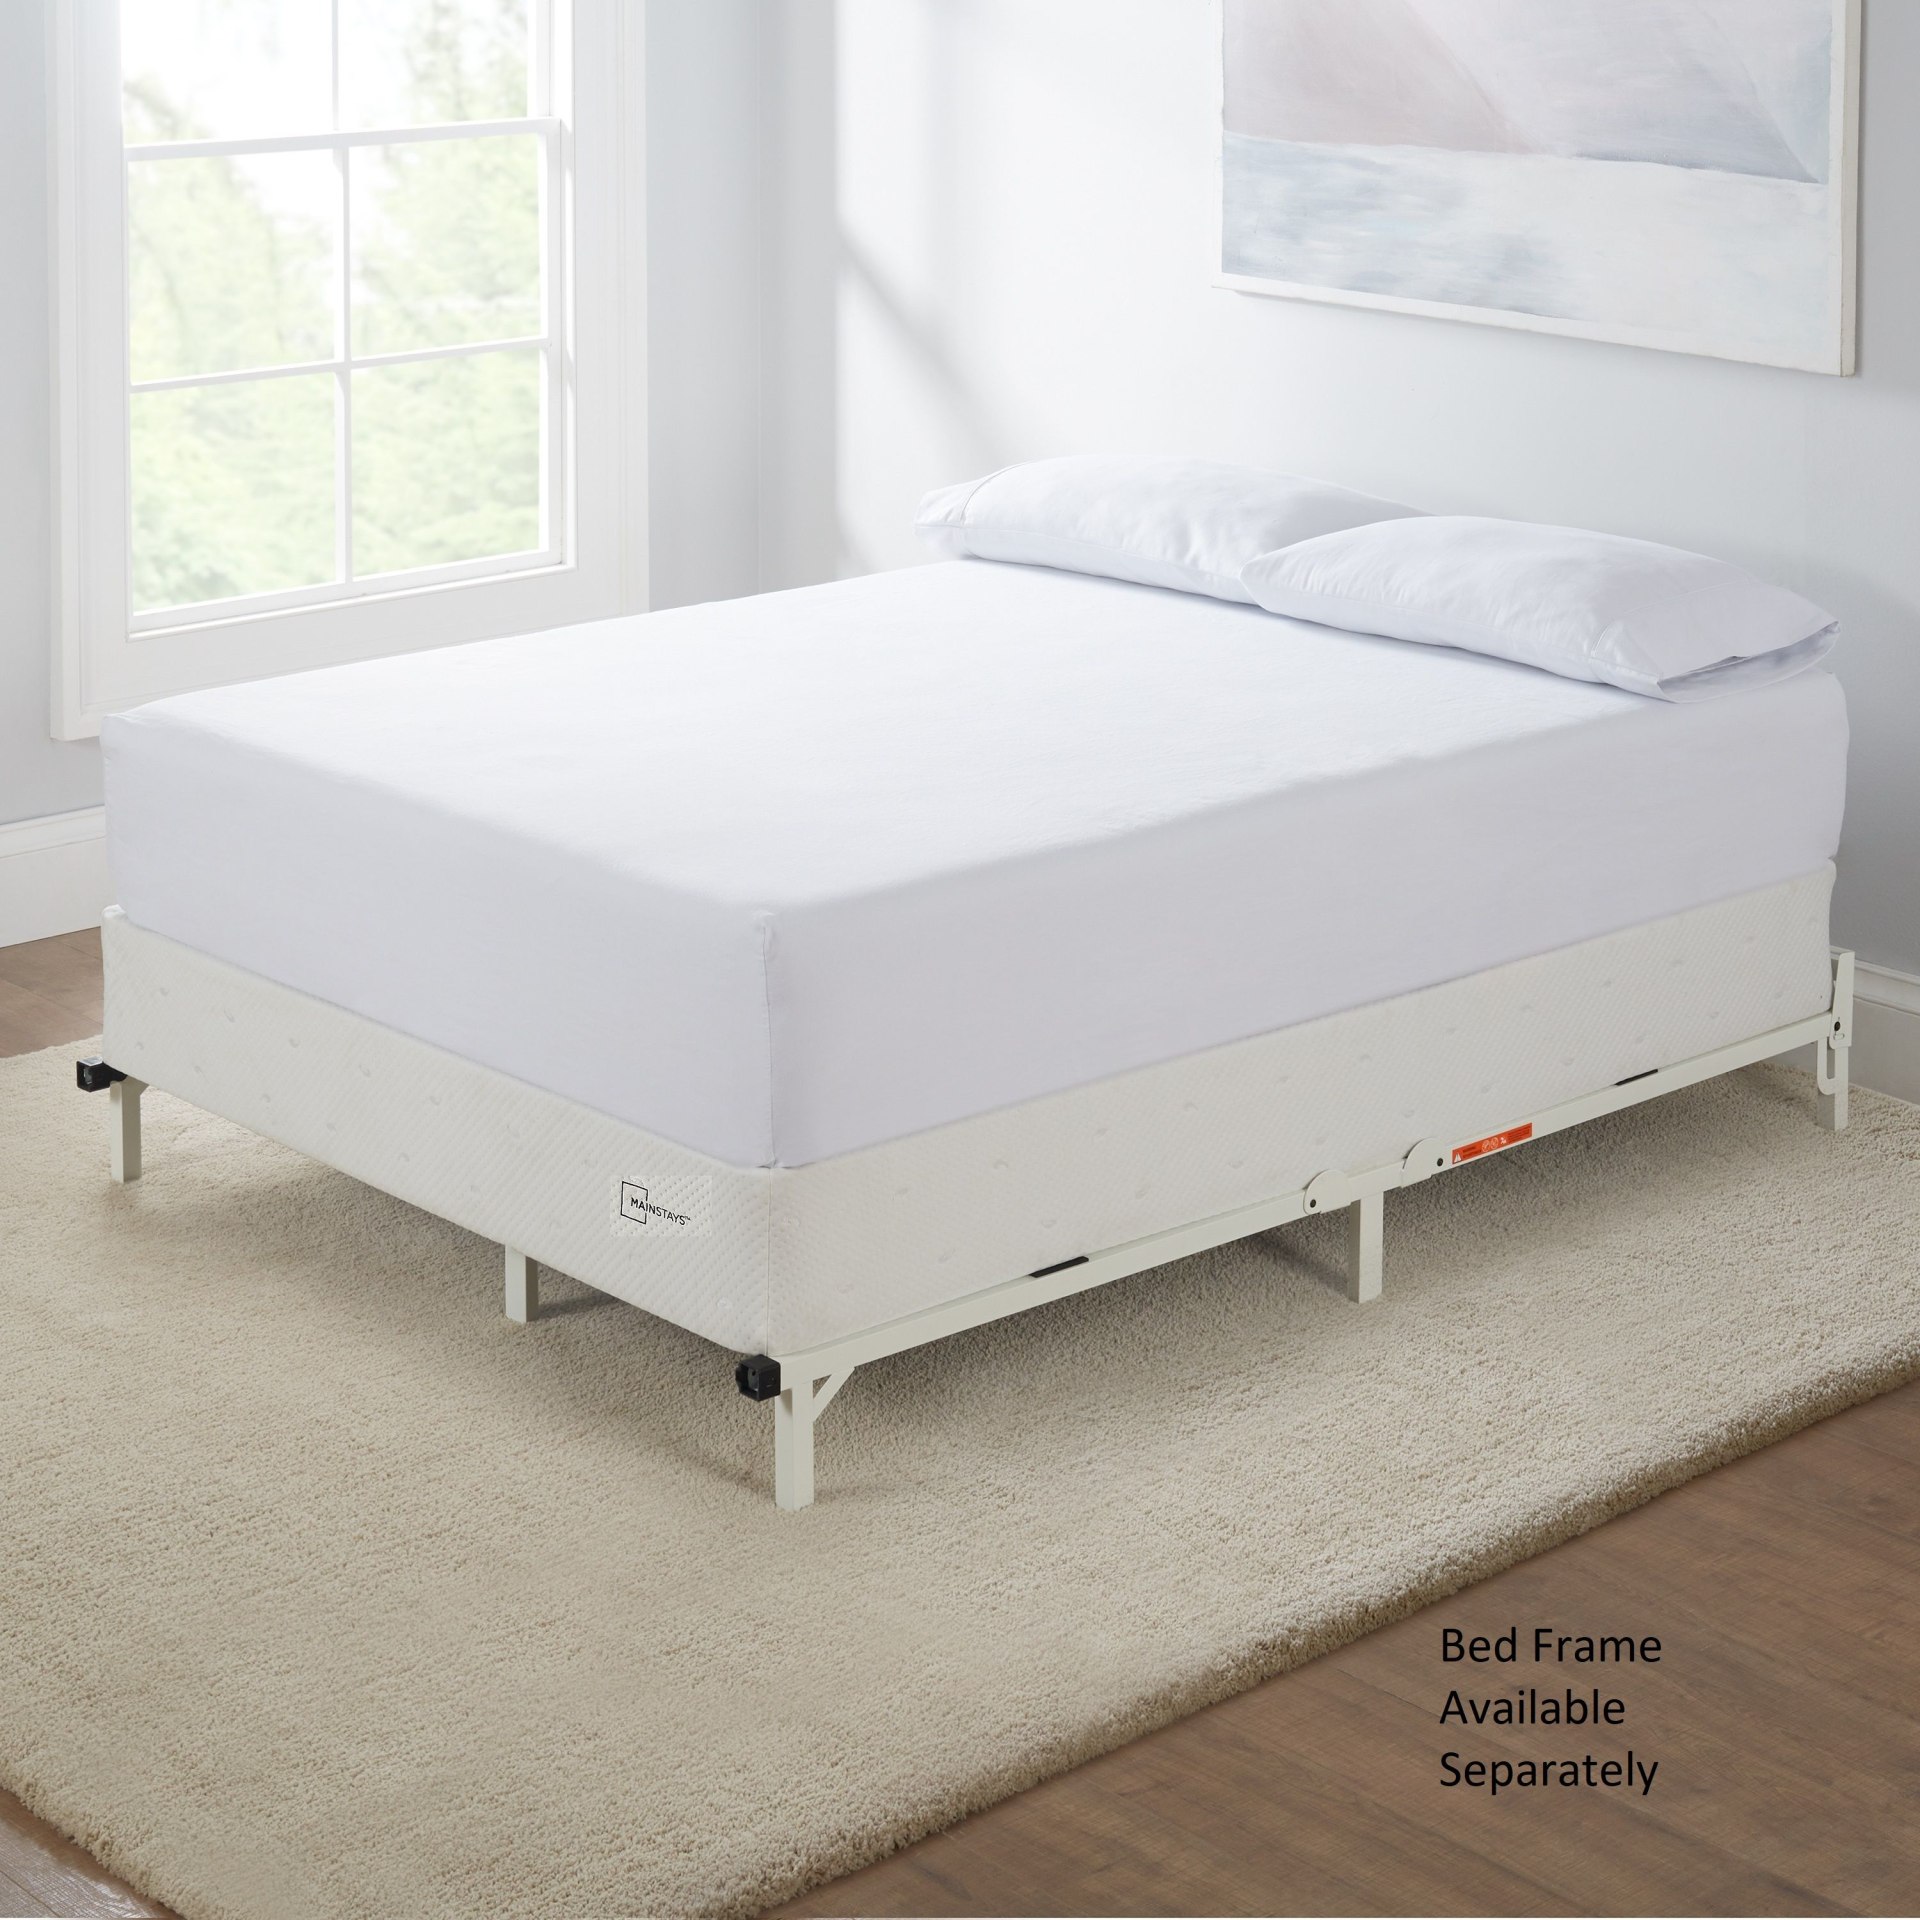 Mainstays 5 Easy Assembly Smart Box, Bed Frame And Box Spring Combinations